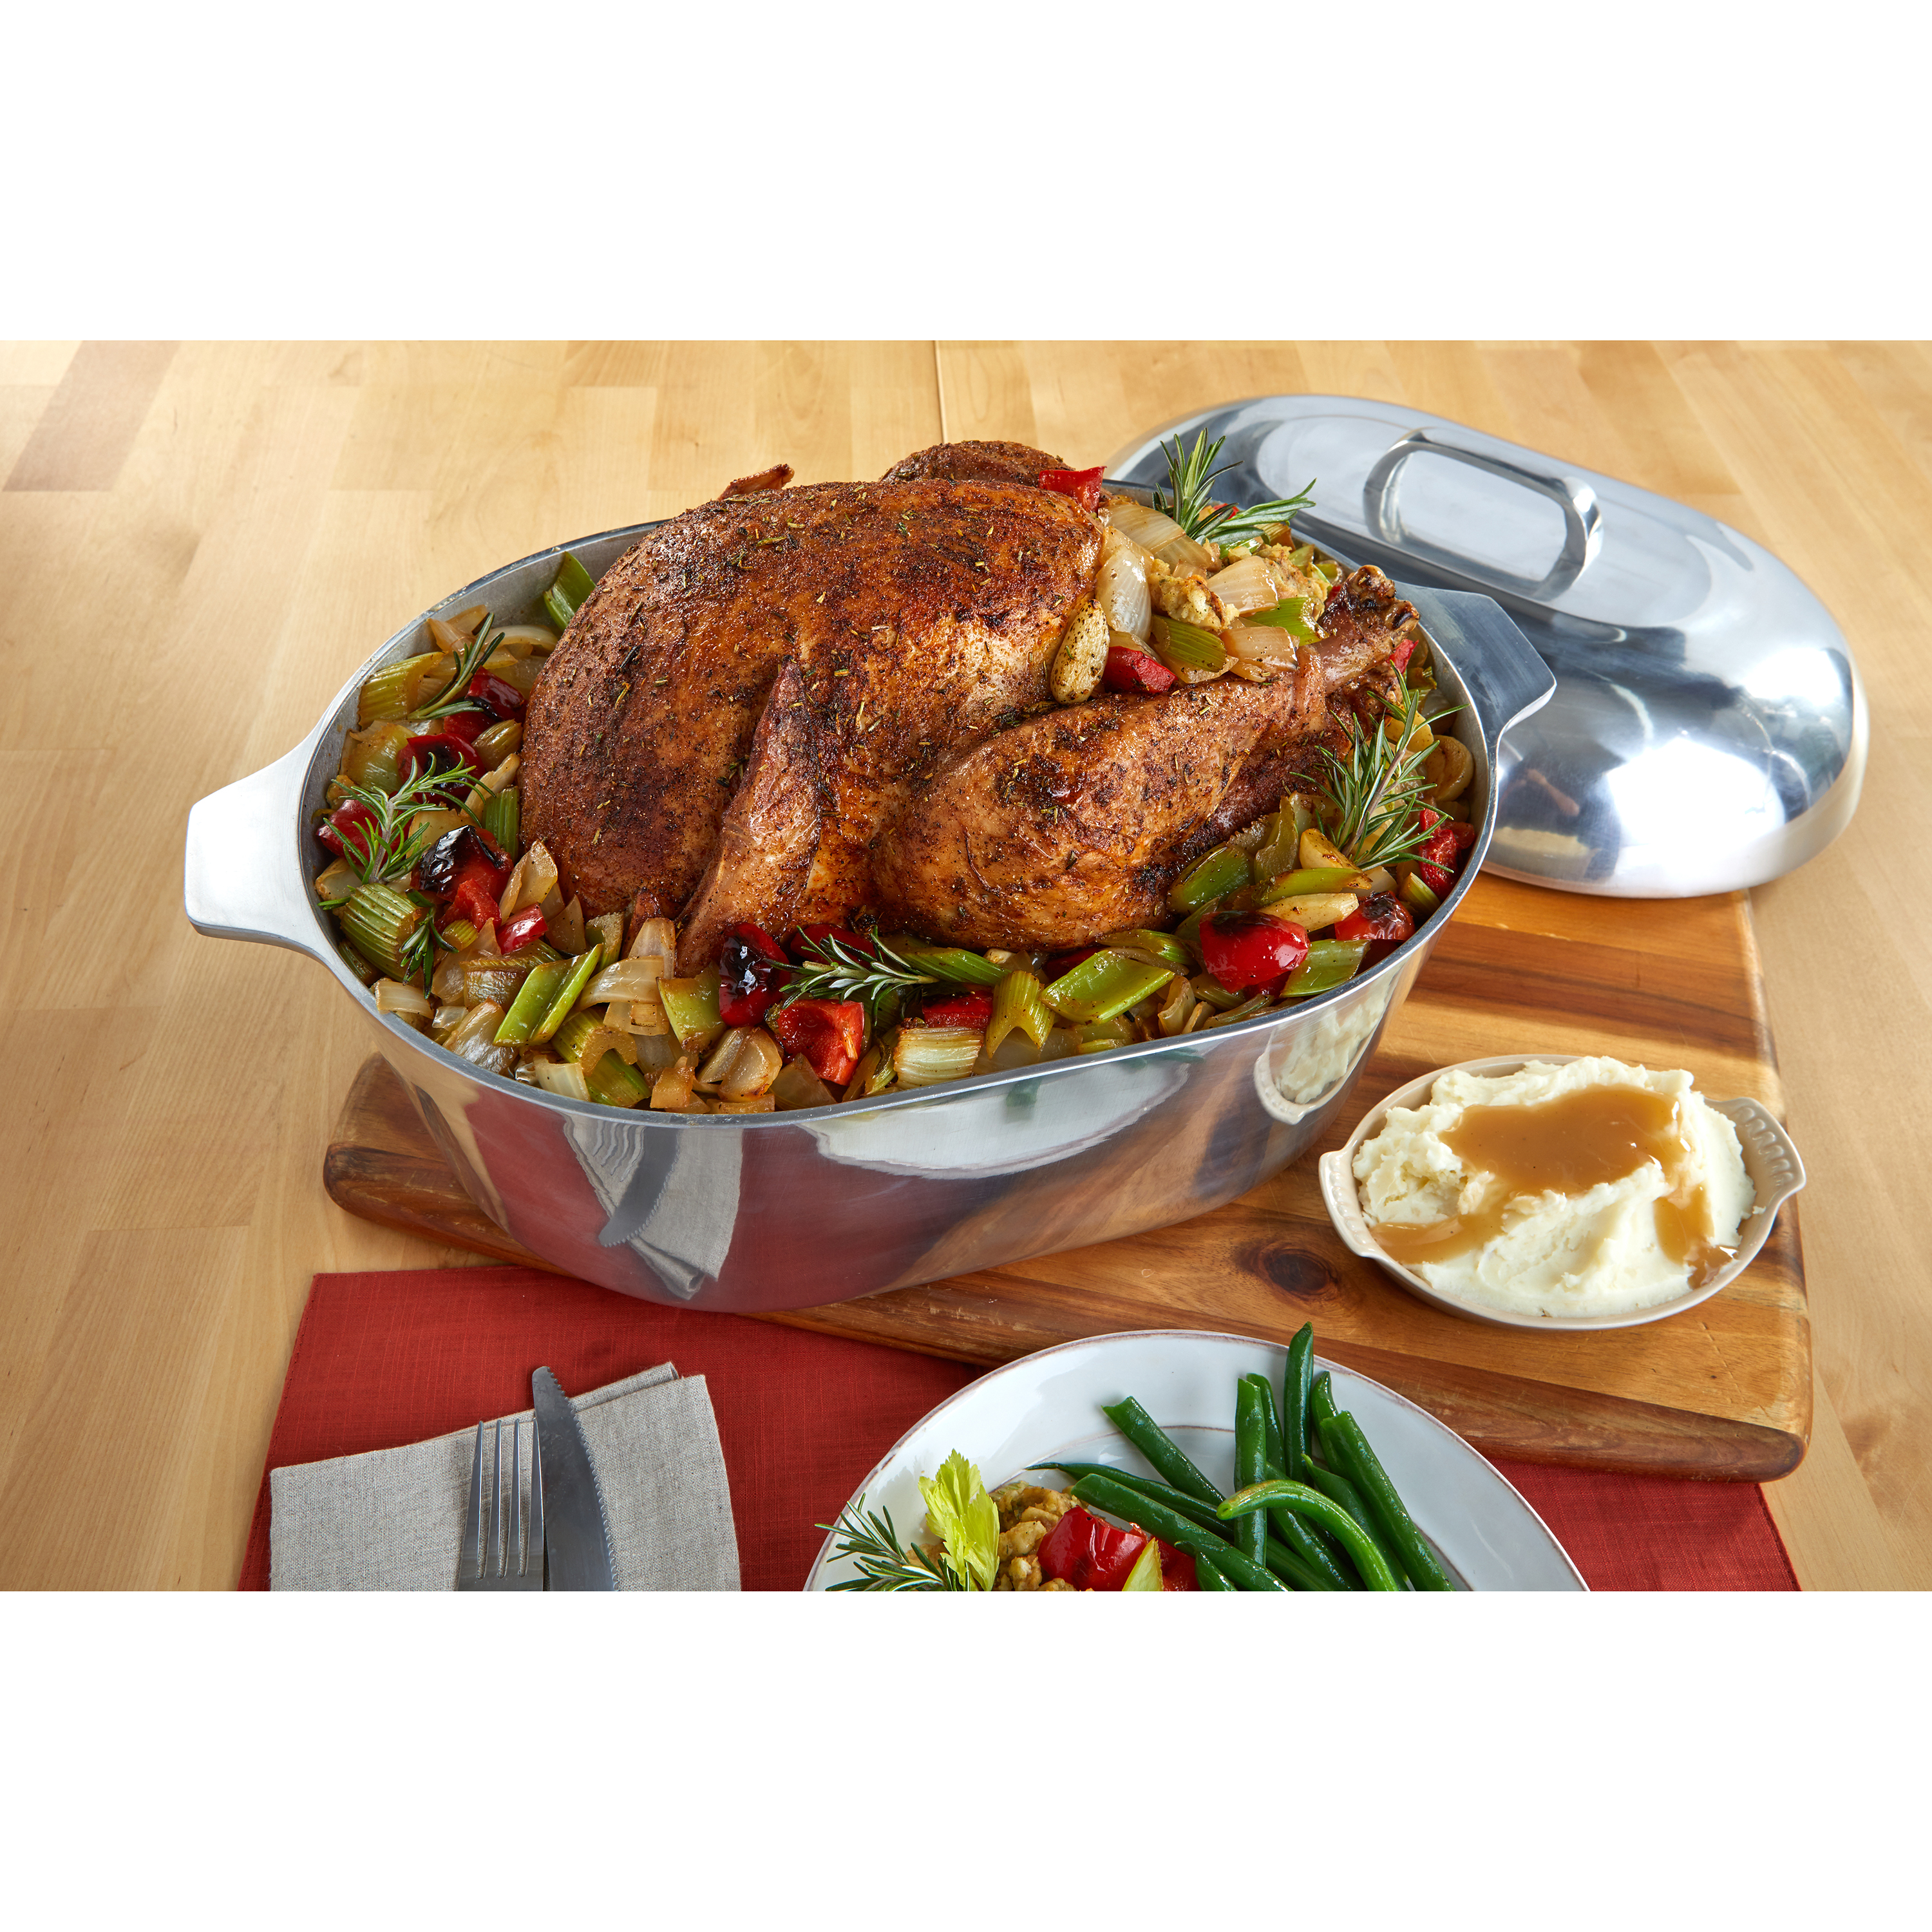 Imusa 11 inch Cajun Oval Cast Aluminum Roaster Pan with Lid, 1 Count 